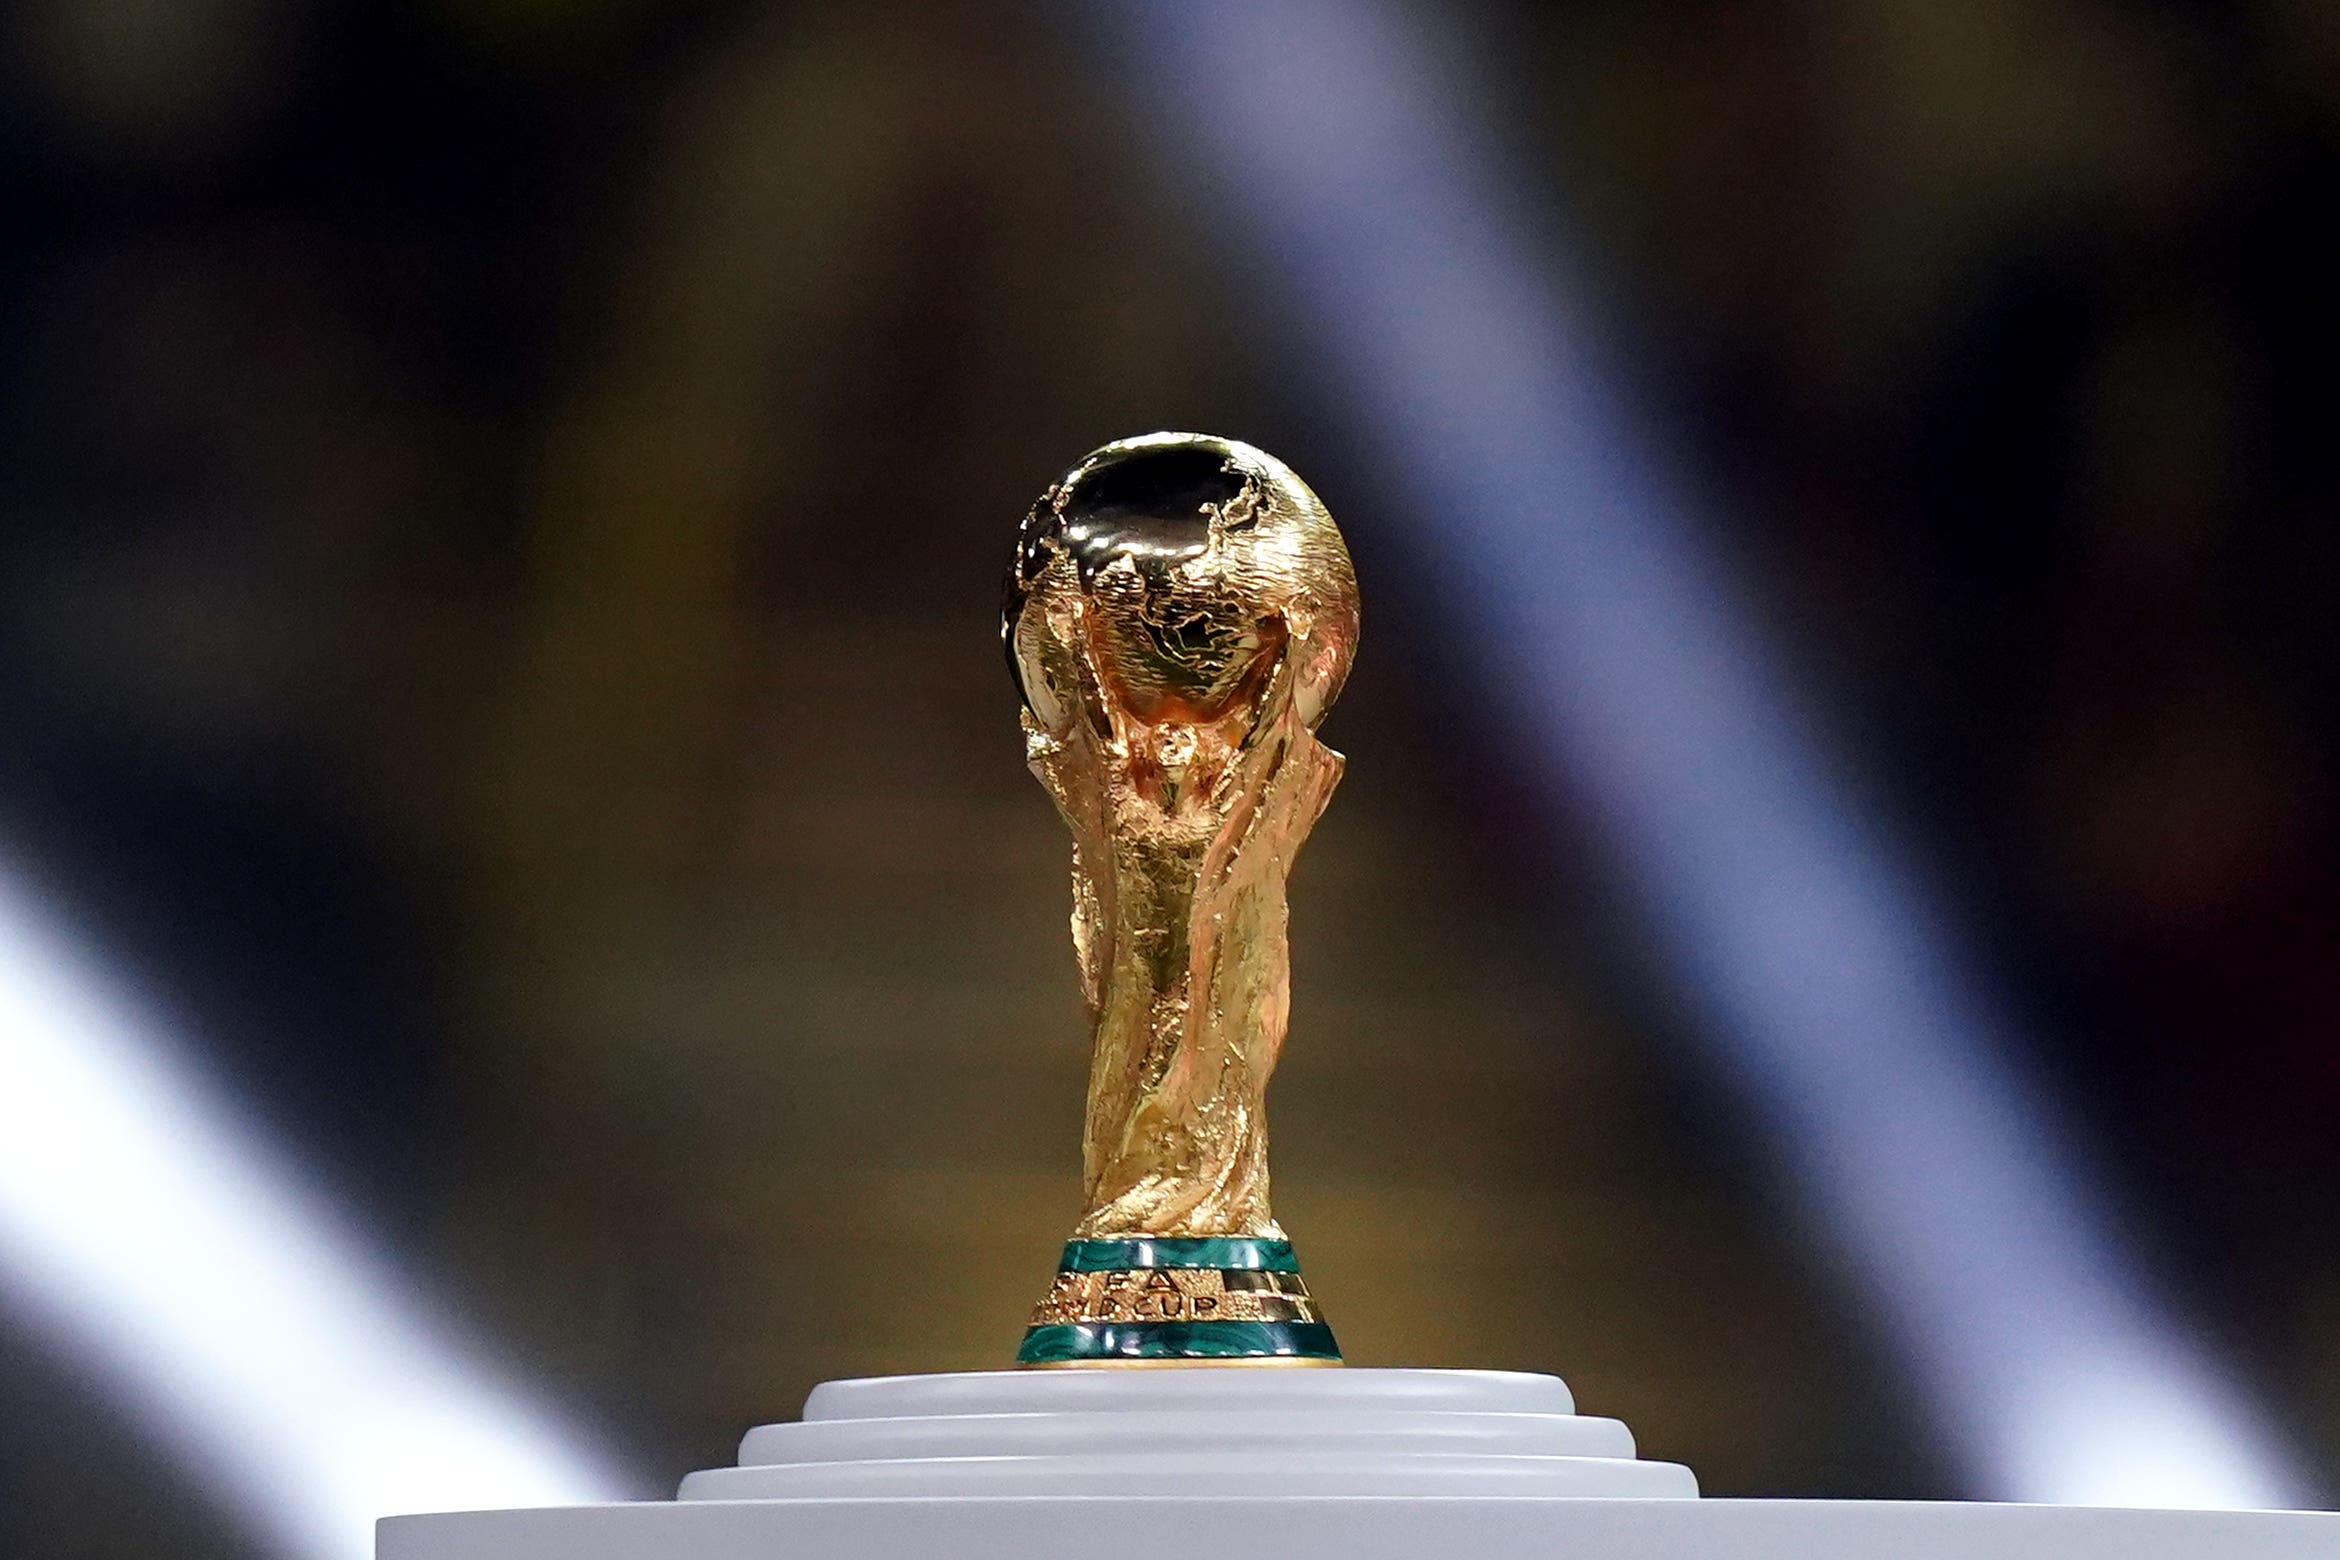 Saudi Arabia is due to host the 2034 World Cup